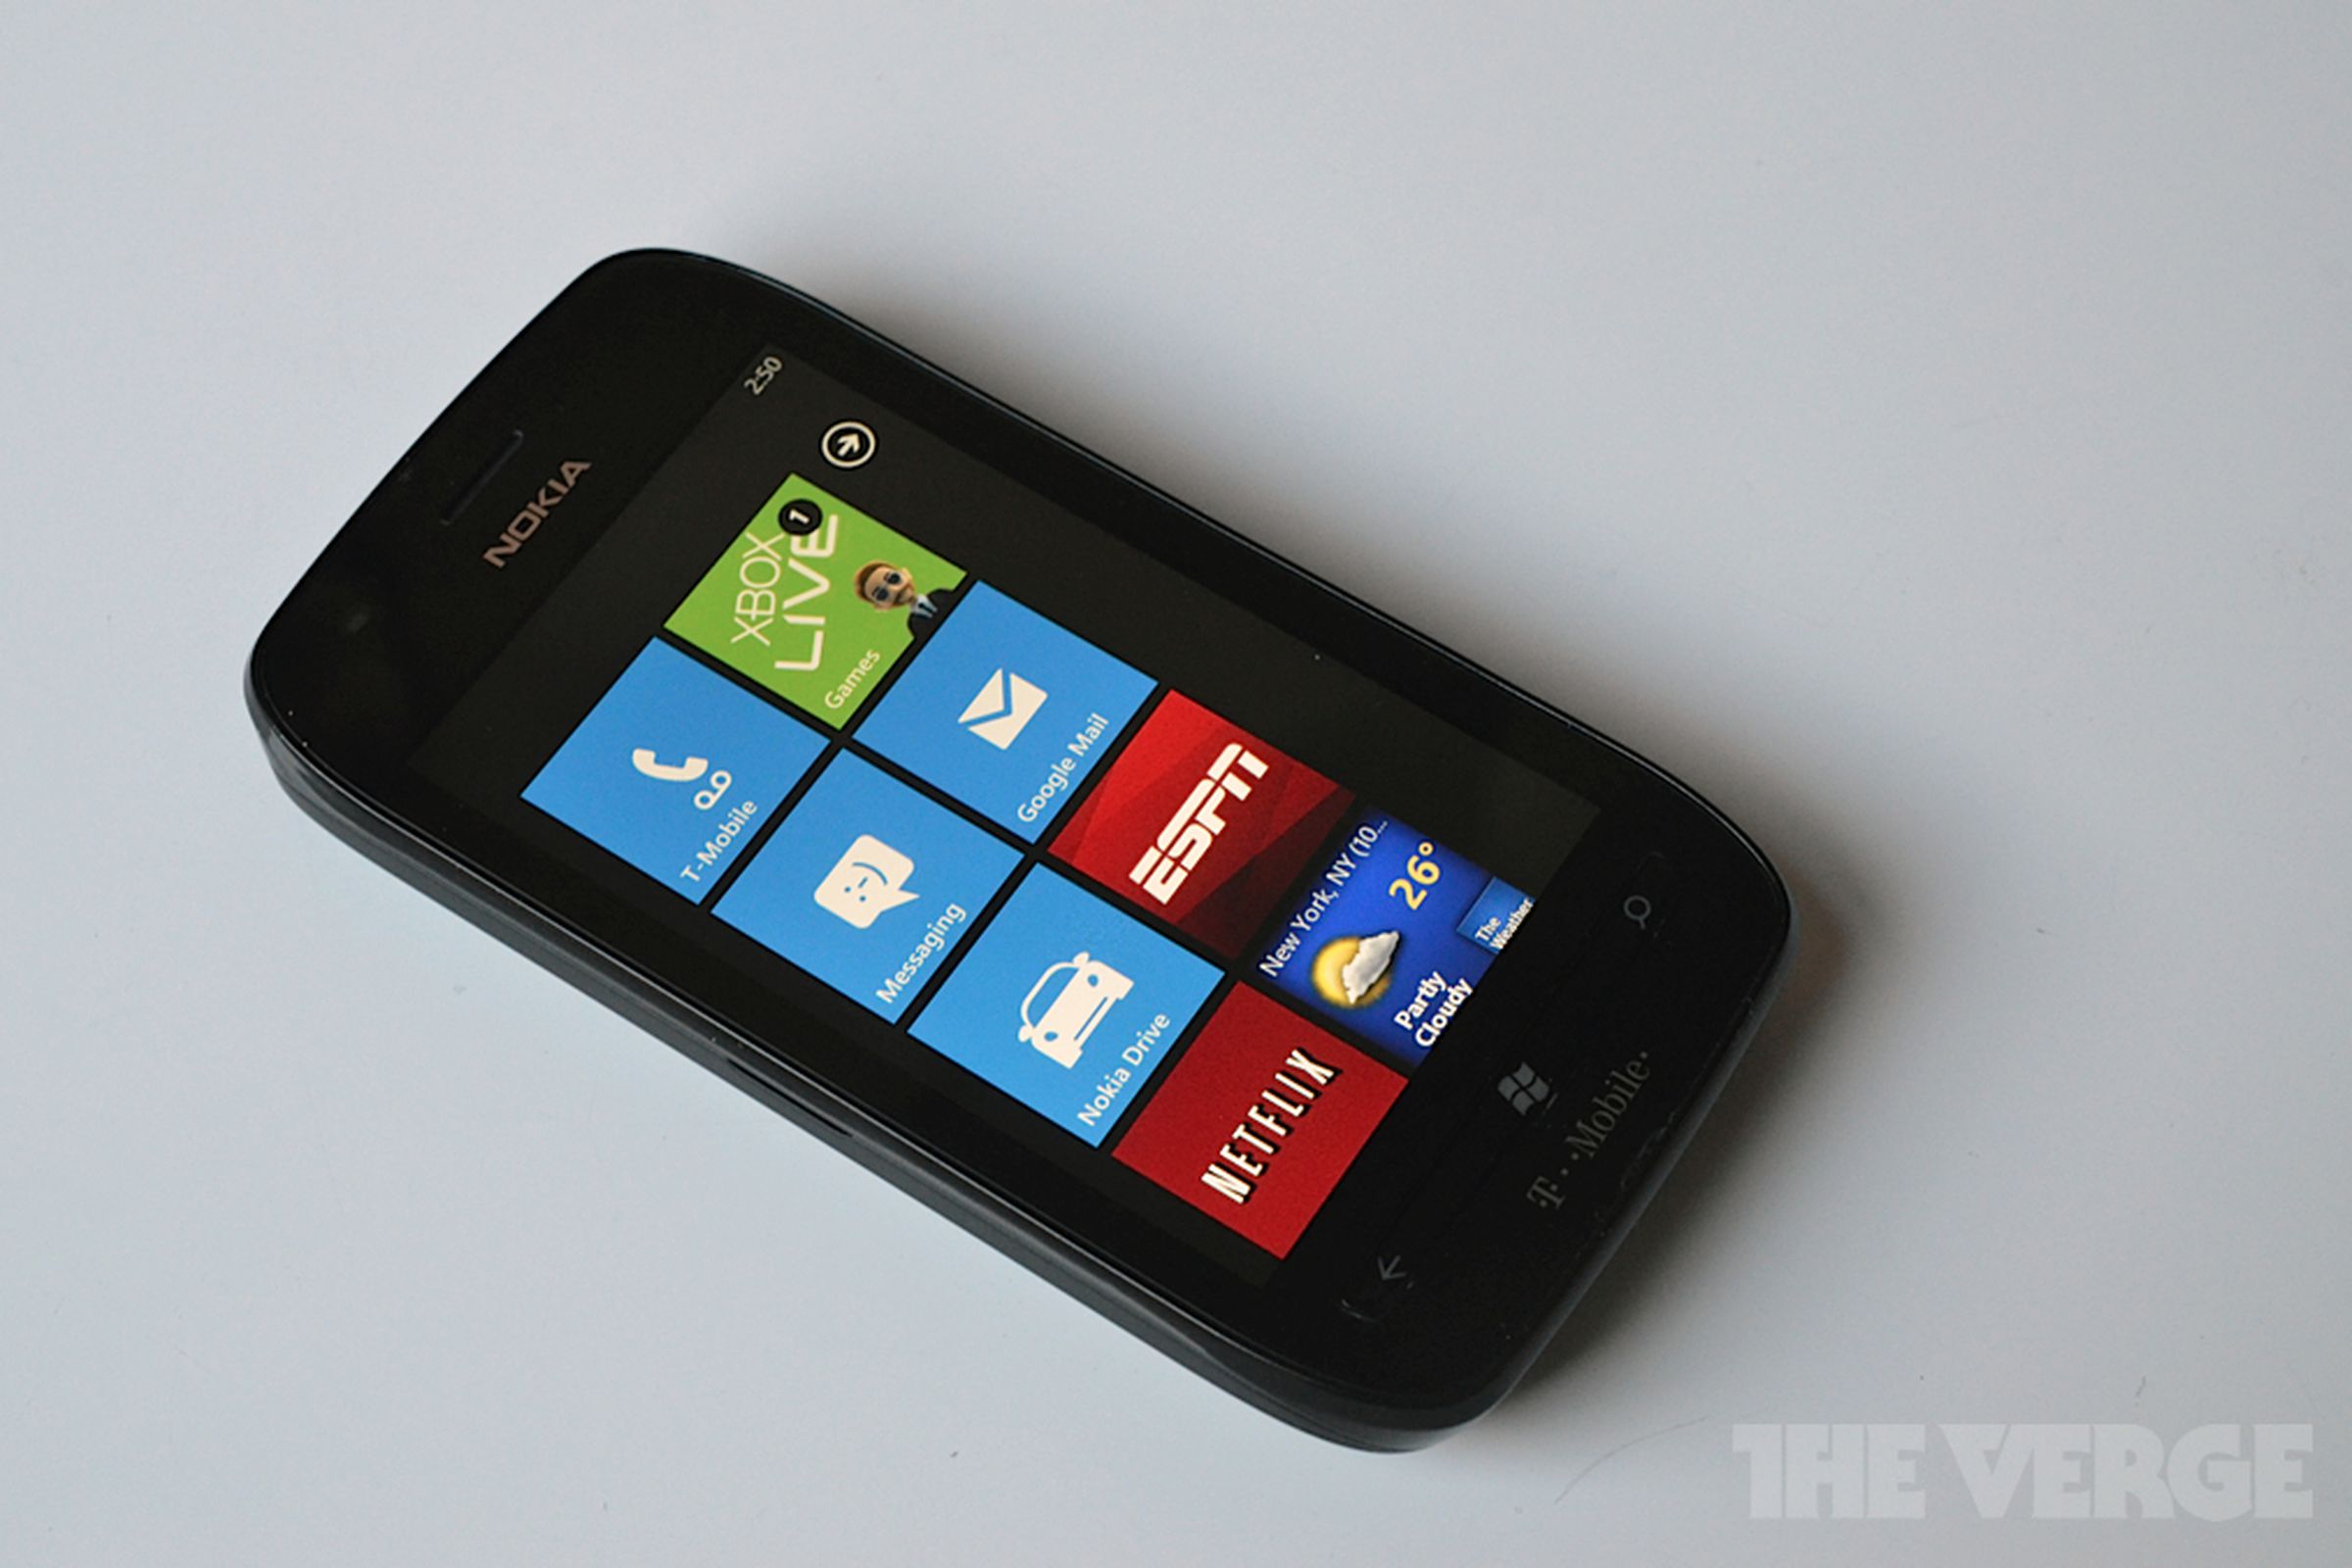 Gallery Photo: Nokia Lumia 710 for T-Mobile review